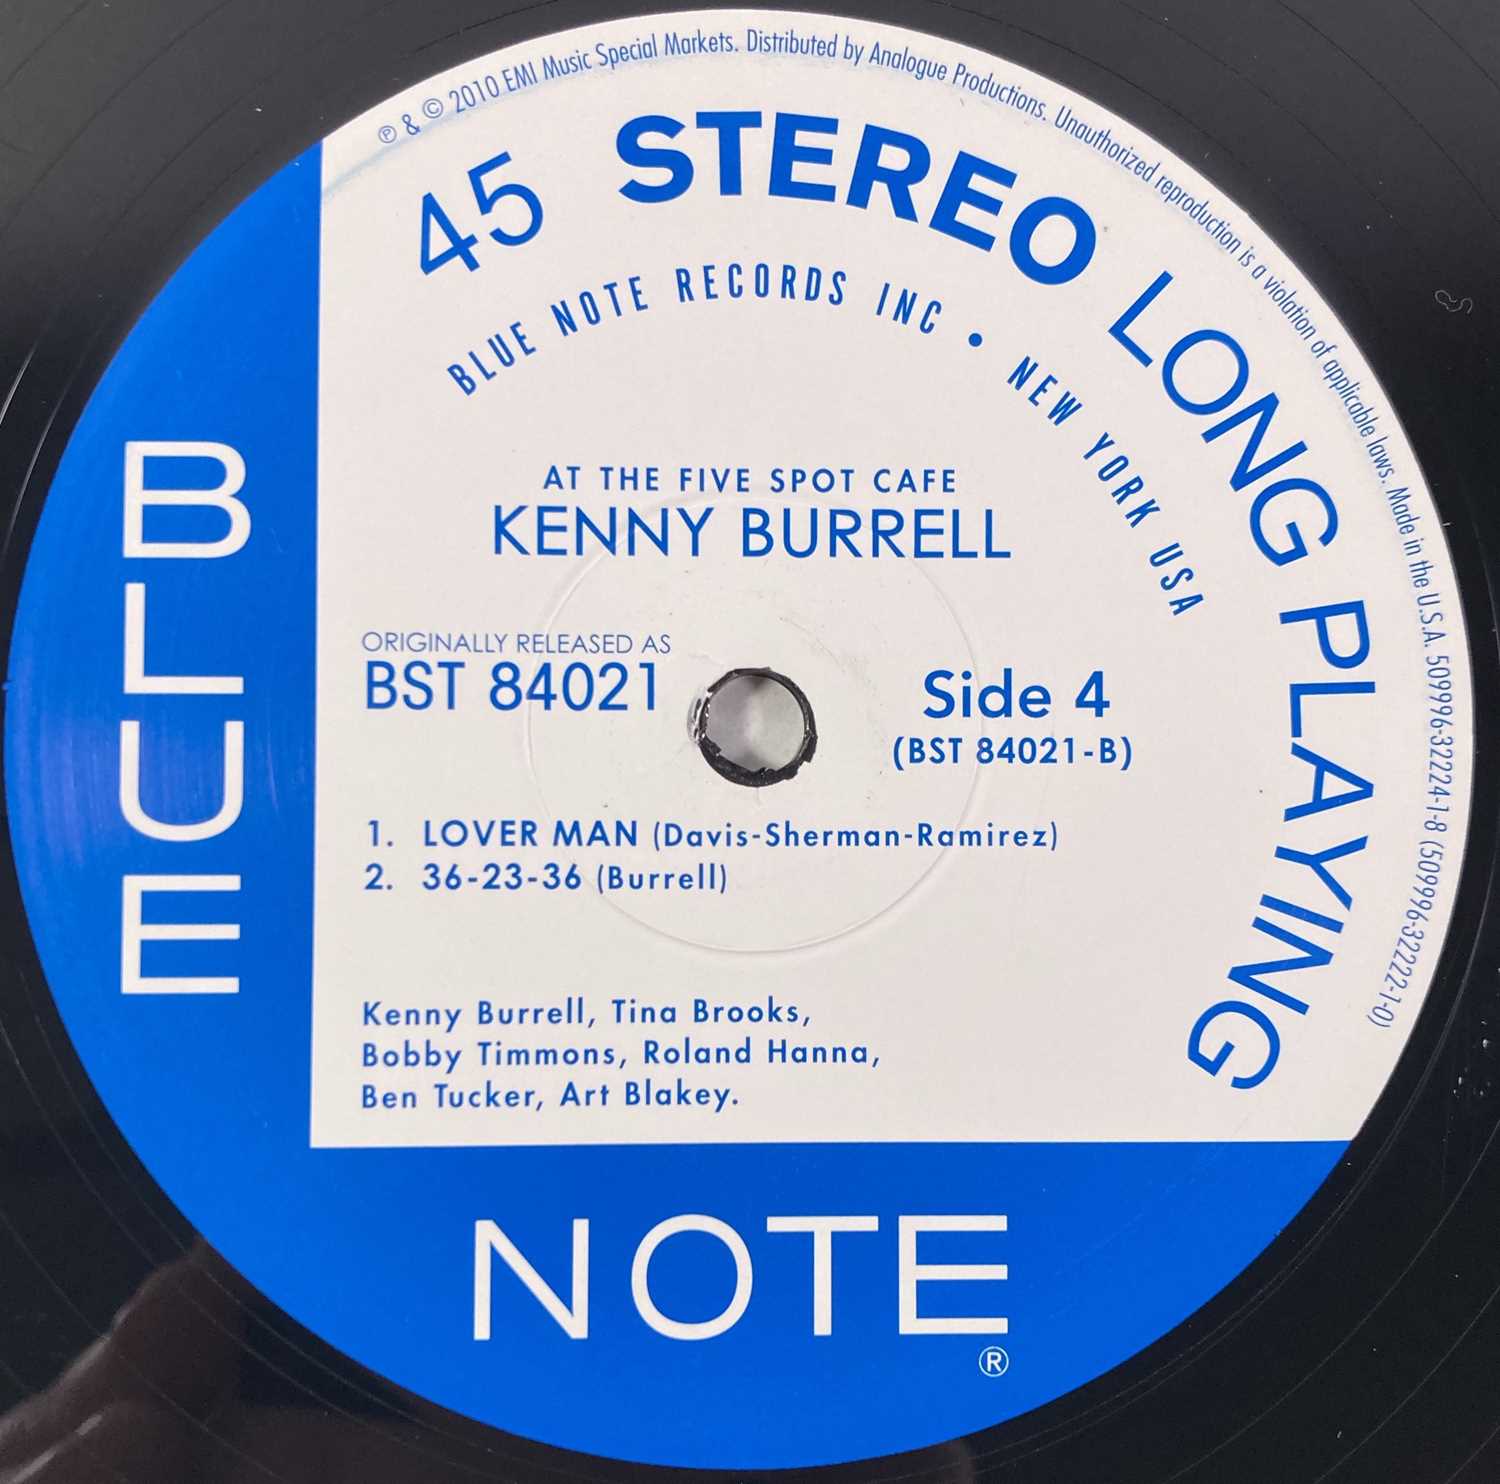 KENNY BURRELL WITH ART BLAKEY - ON VIEW AT THE FIVE SPOT CAFE LP (2010 LTD EDITION PRESSING - 509996 - Image 6 of 8